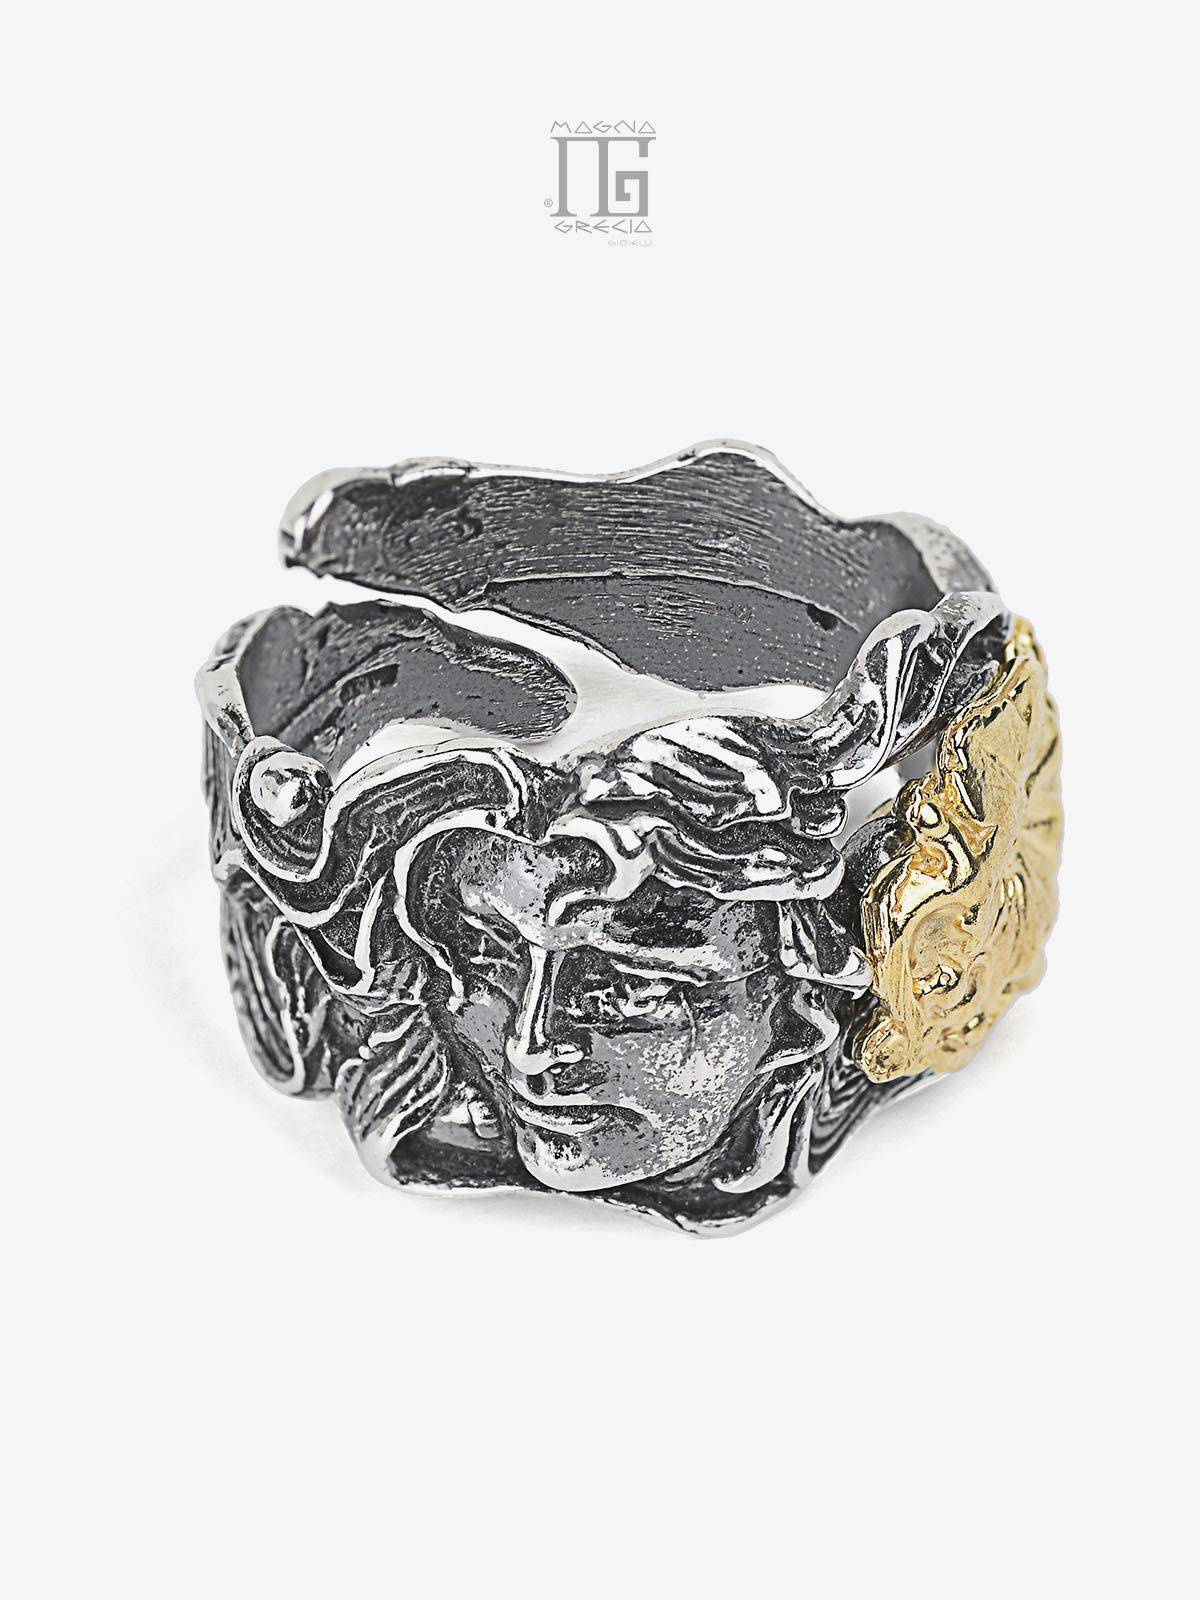 "Autumn" Ring in Silver with the Face of the Goddess Venus and a Bunch of Grapes depicted Cod. MGK 3137 V